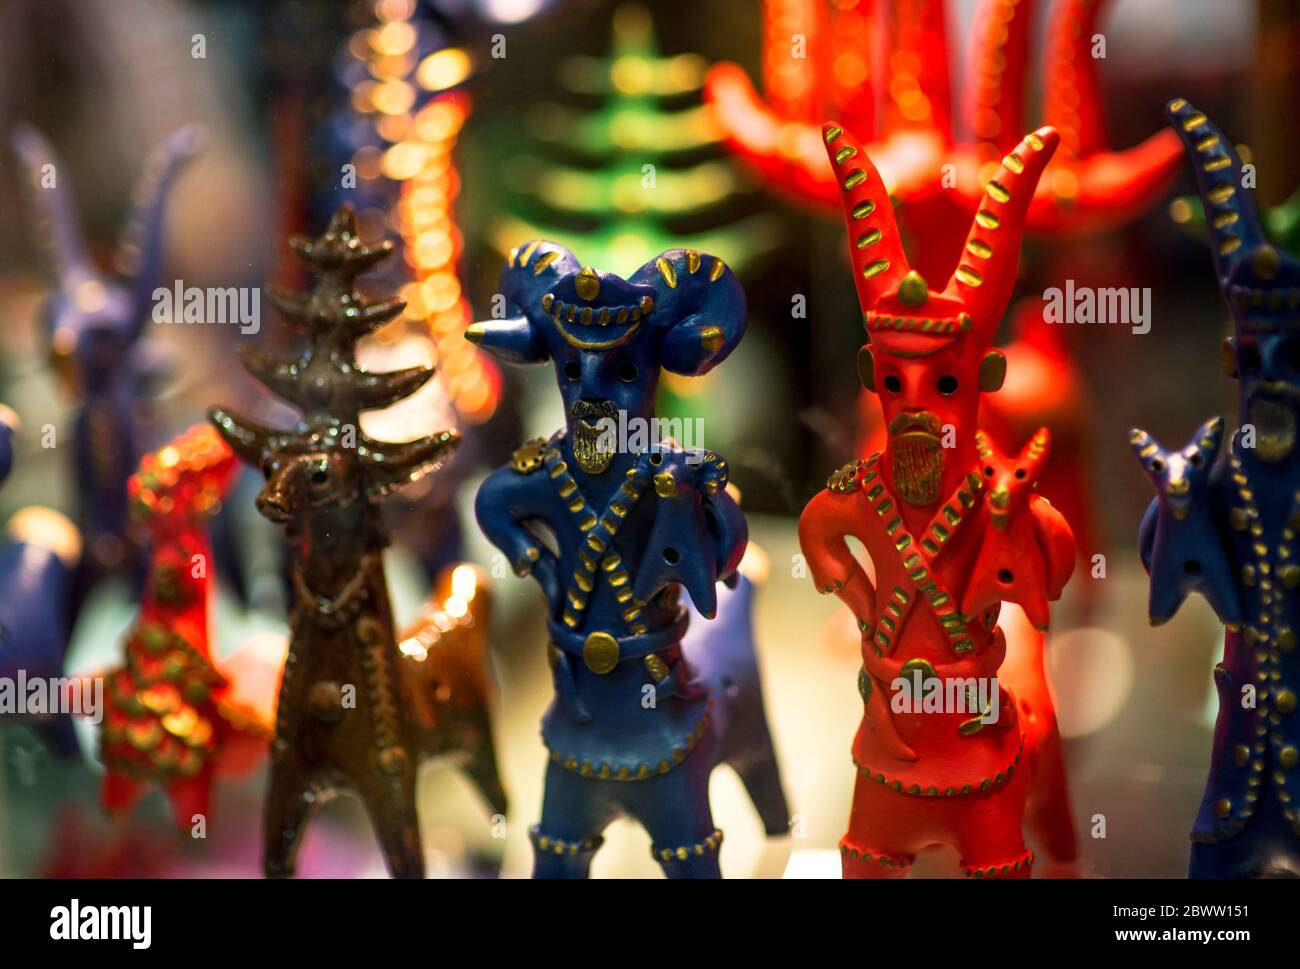 Beautiful vintage colourful wooden dymkovo dolls at market. Baphomet dolls is folks cultural symbol of Satanic cult. With selective focus on one doll Stock Photo